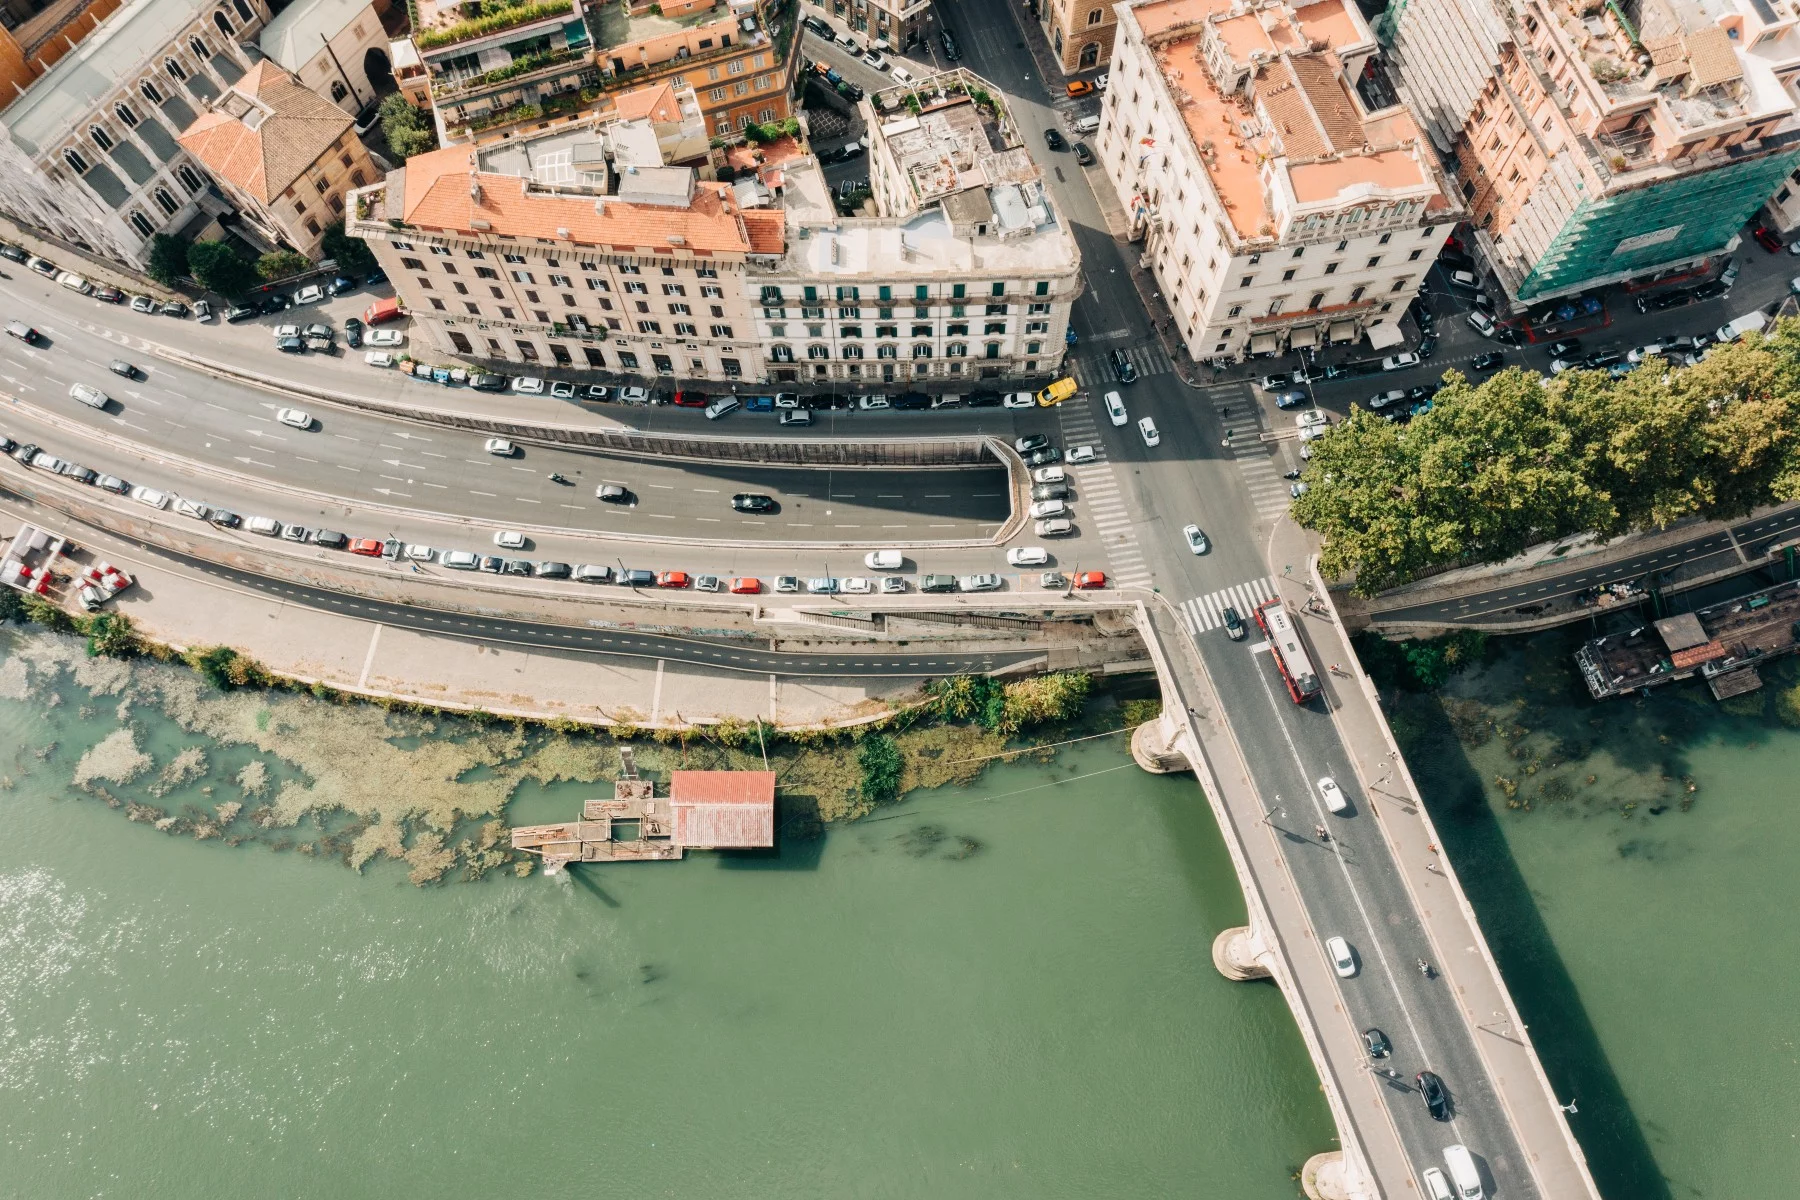 Aerial view of a road near the waterfront in Rome, Italy. Cars are parked along the way.